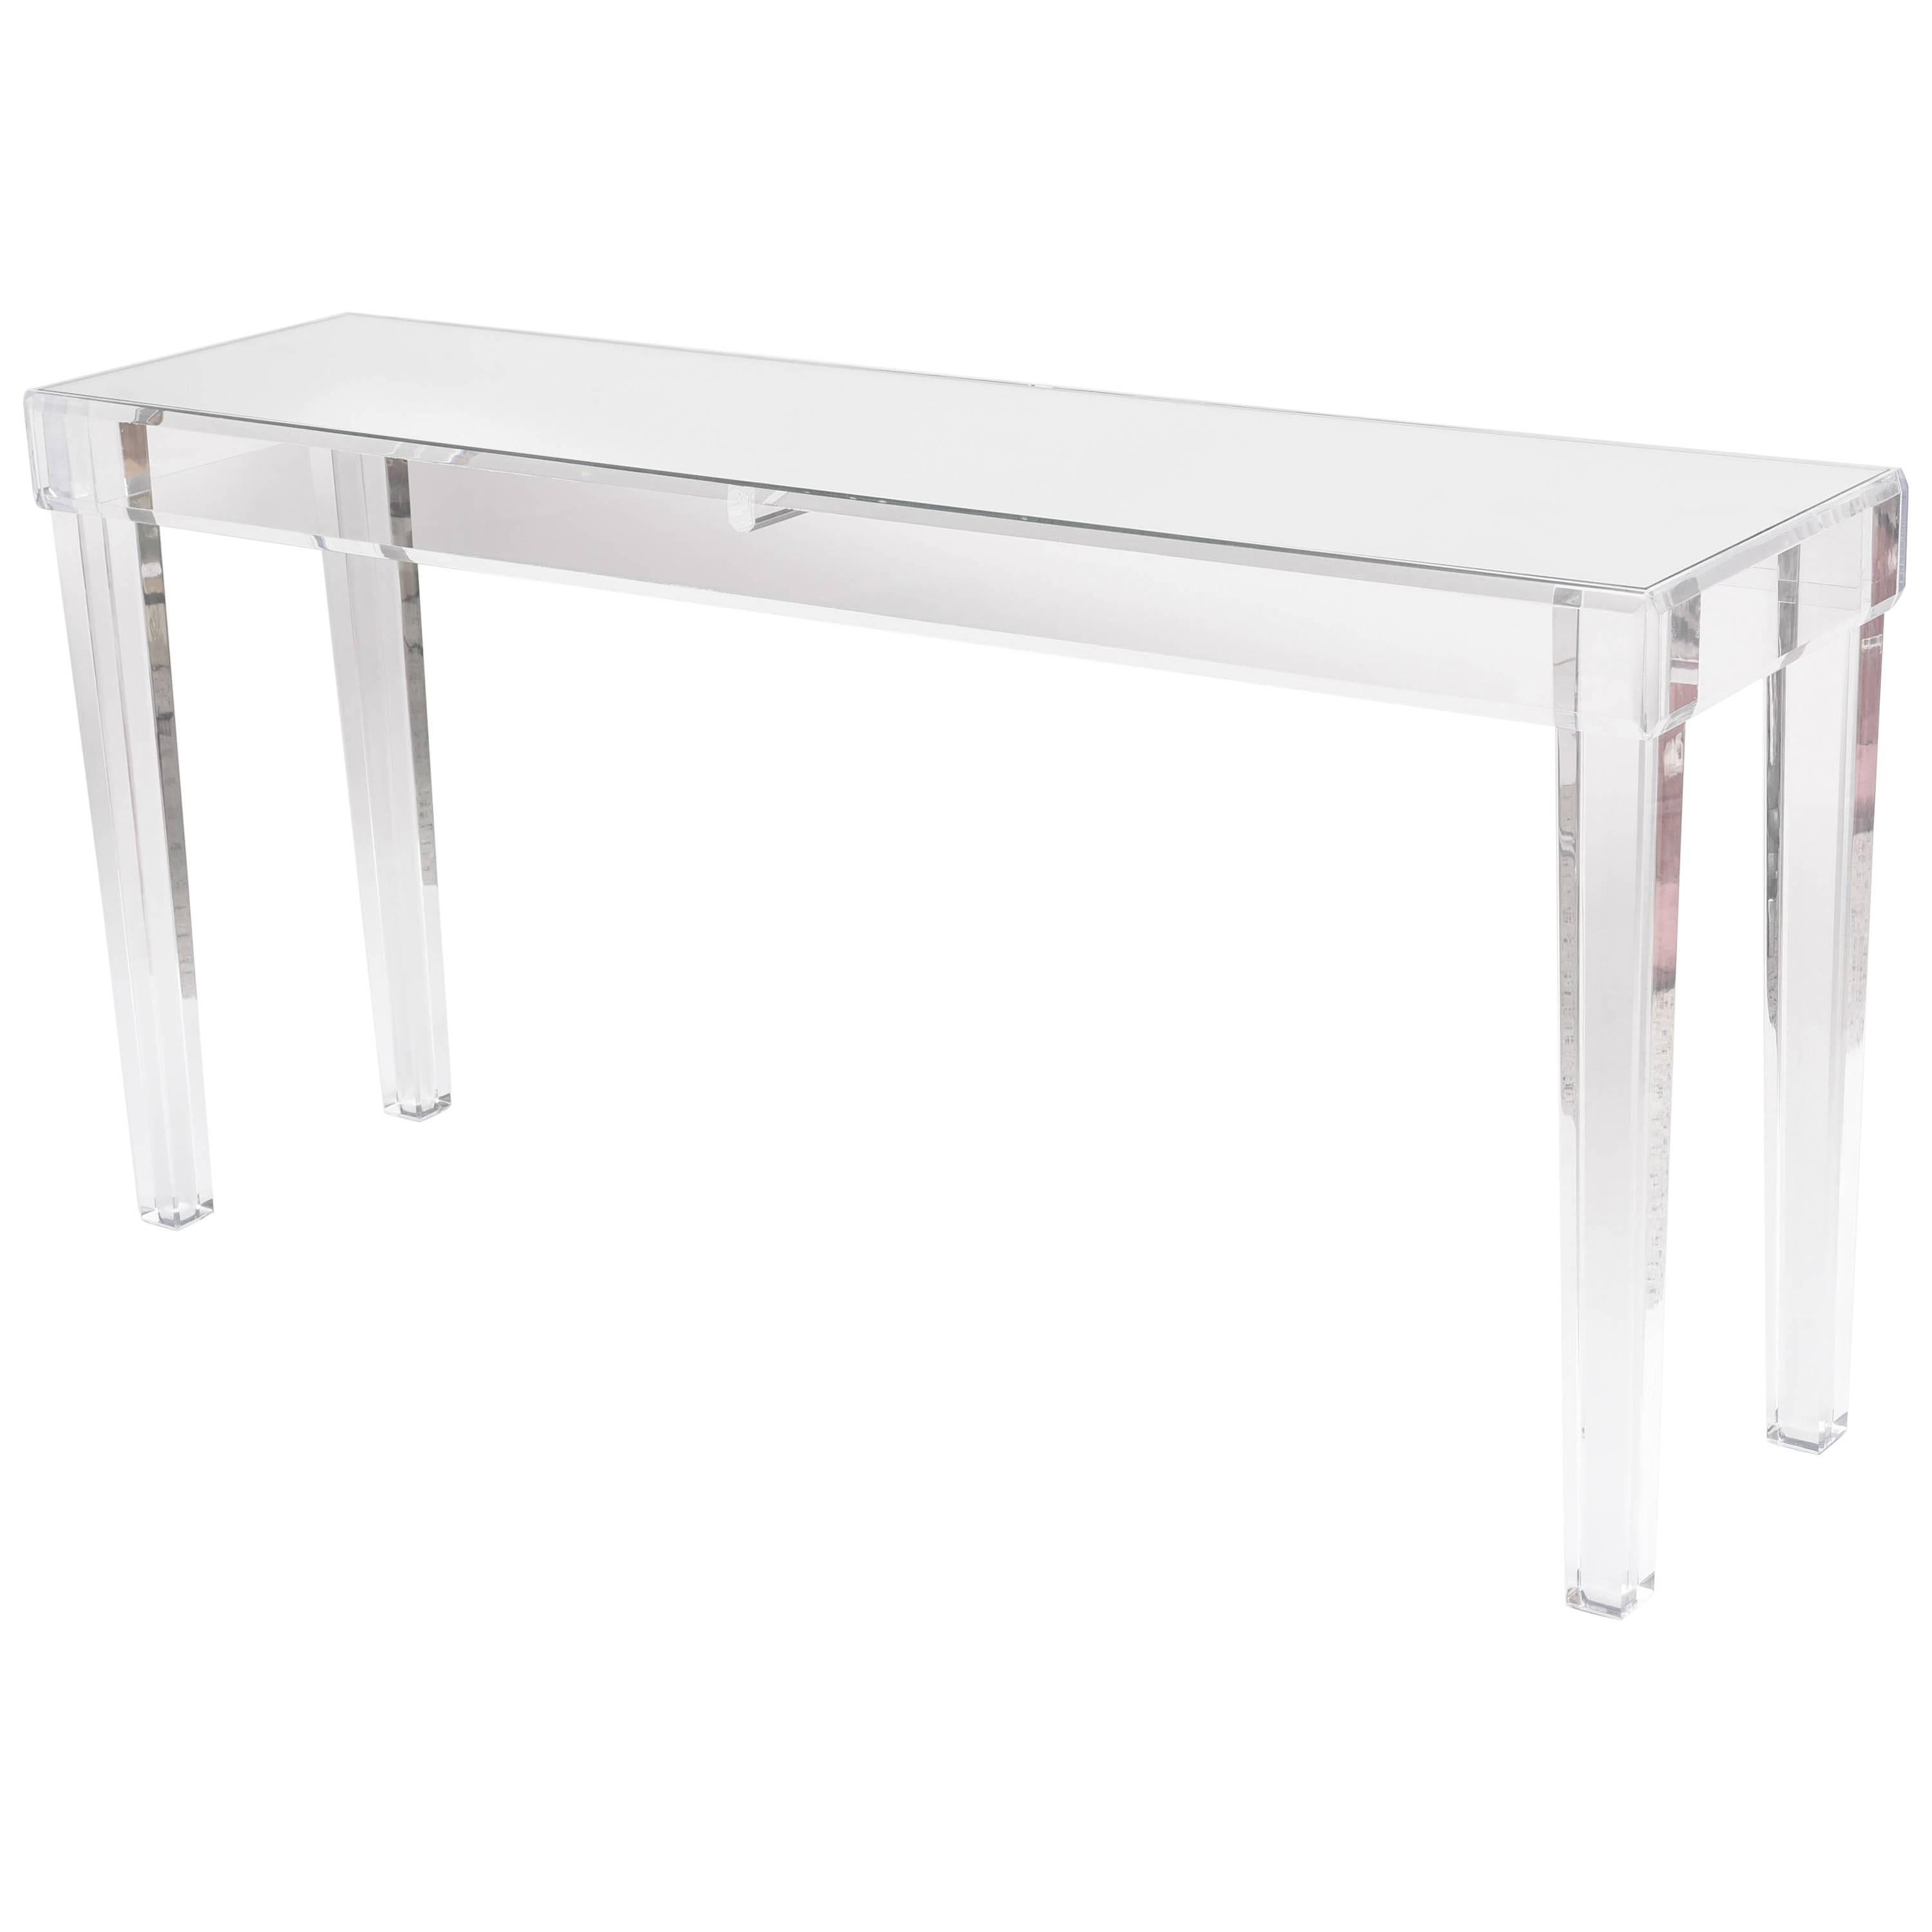 Bespoke Lucite and Mirror Console Table, American, Modern